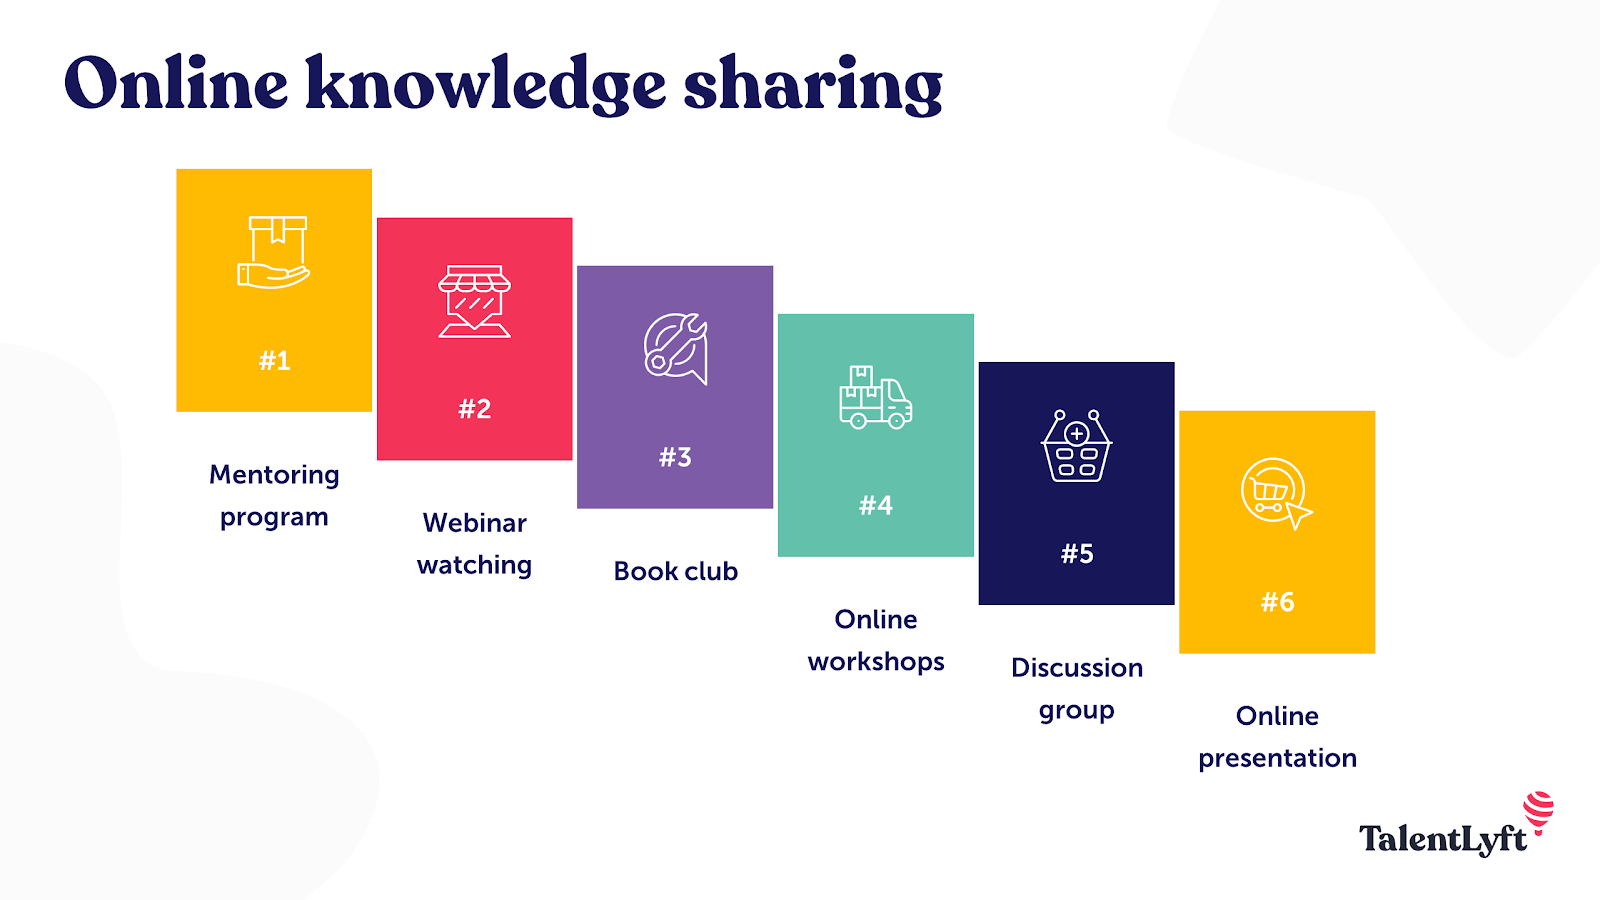 Online knowledge sharing sessions